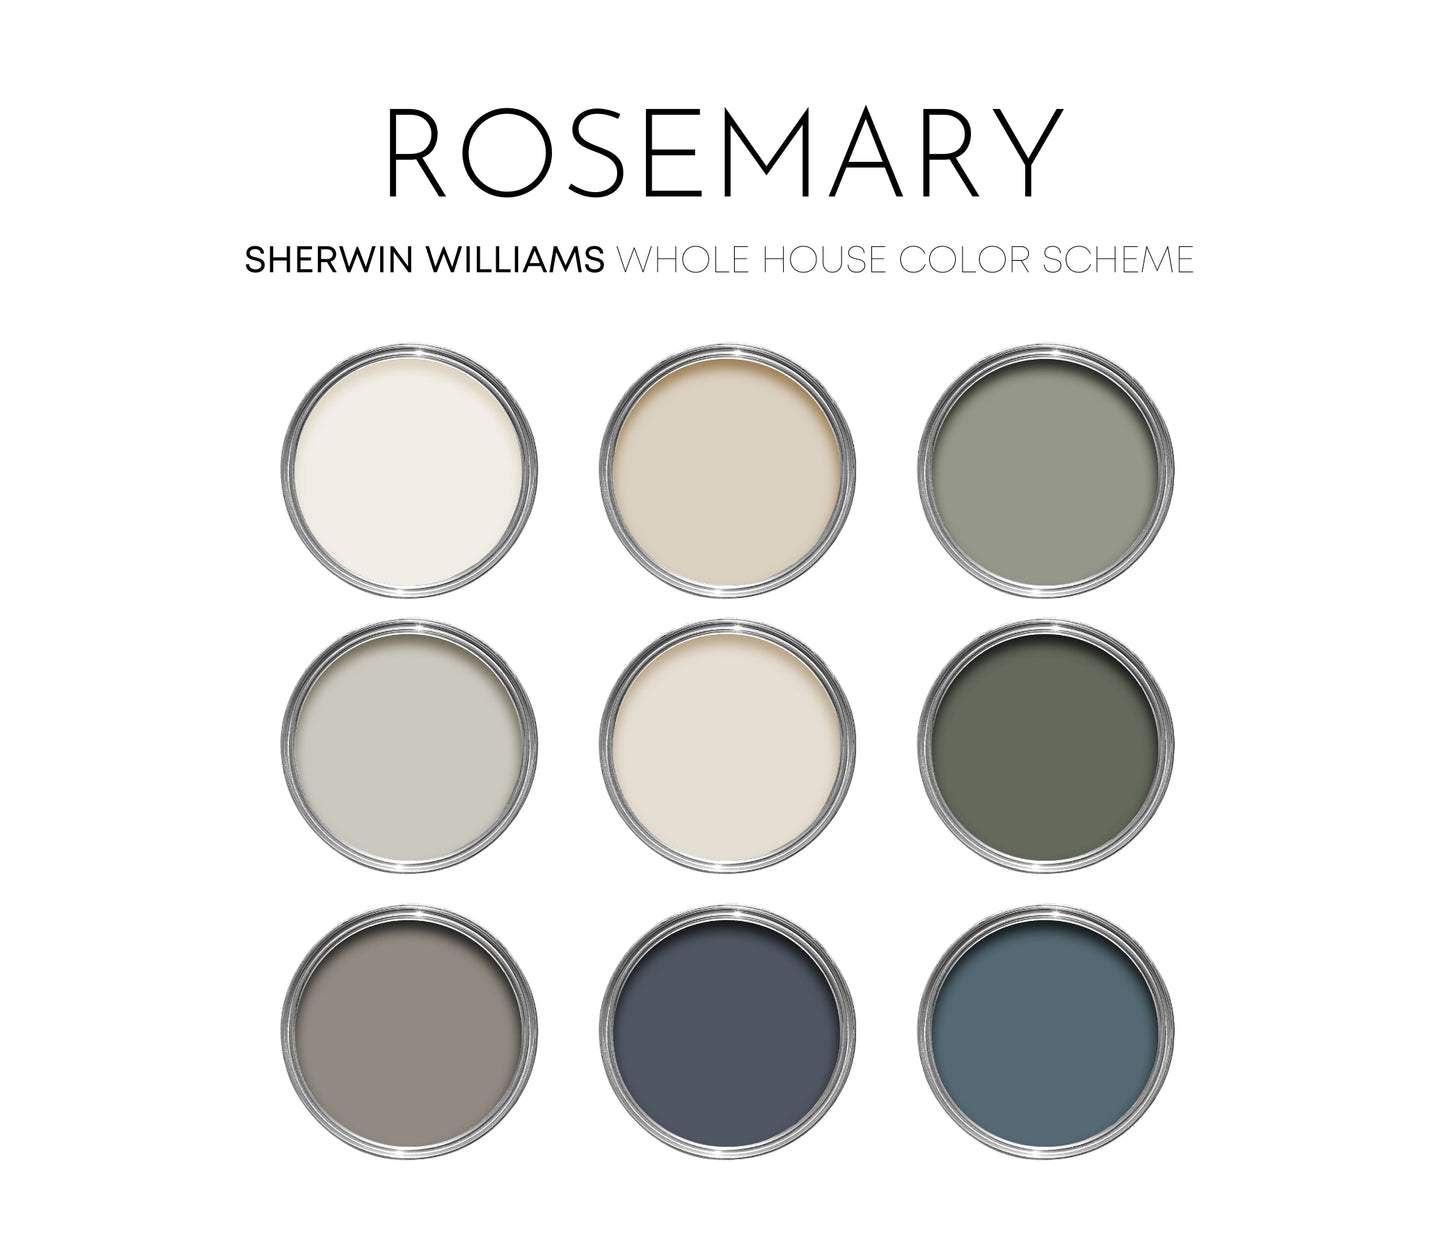 Rosemary Sherwin Williams Paint Palette, Neutral Interior Paint Colors for Home, Moody Interior Design Color Palette, Evergreen Fog